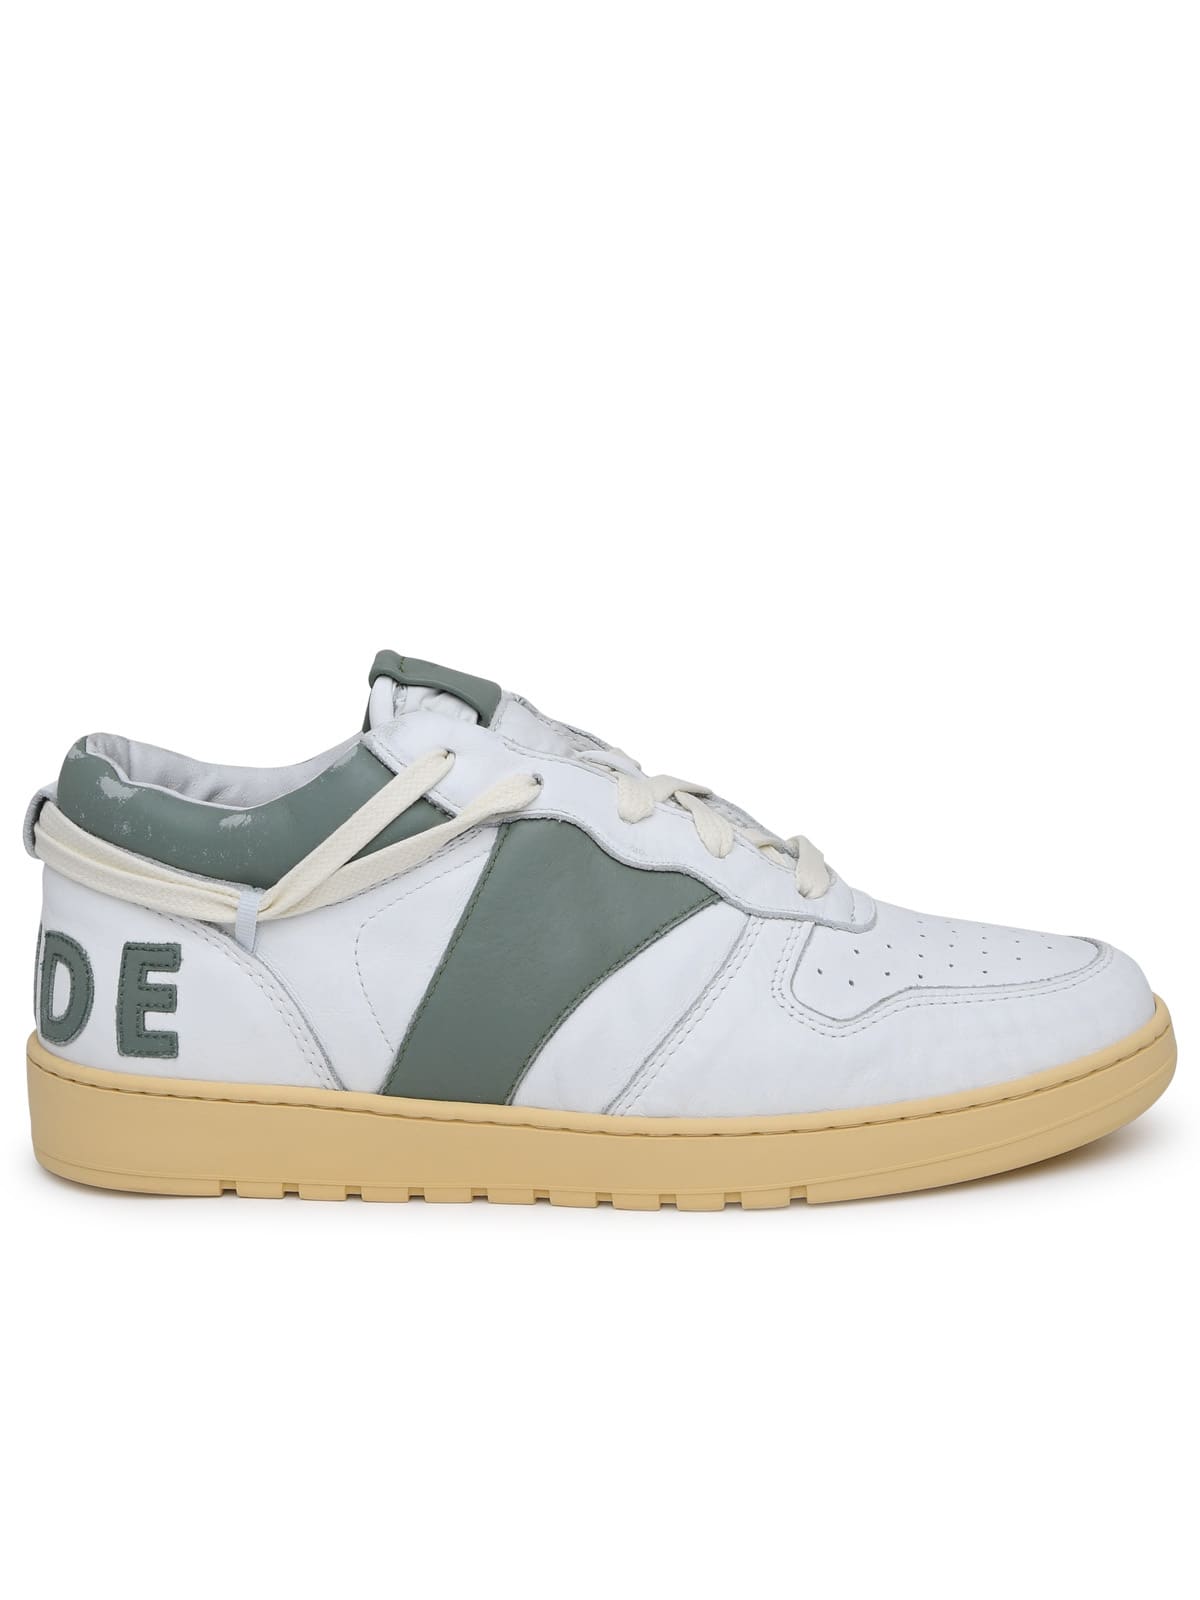 RHUDE WHITE LEATHER RECHESS SNEAKERS